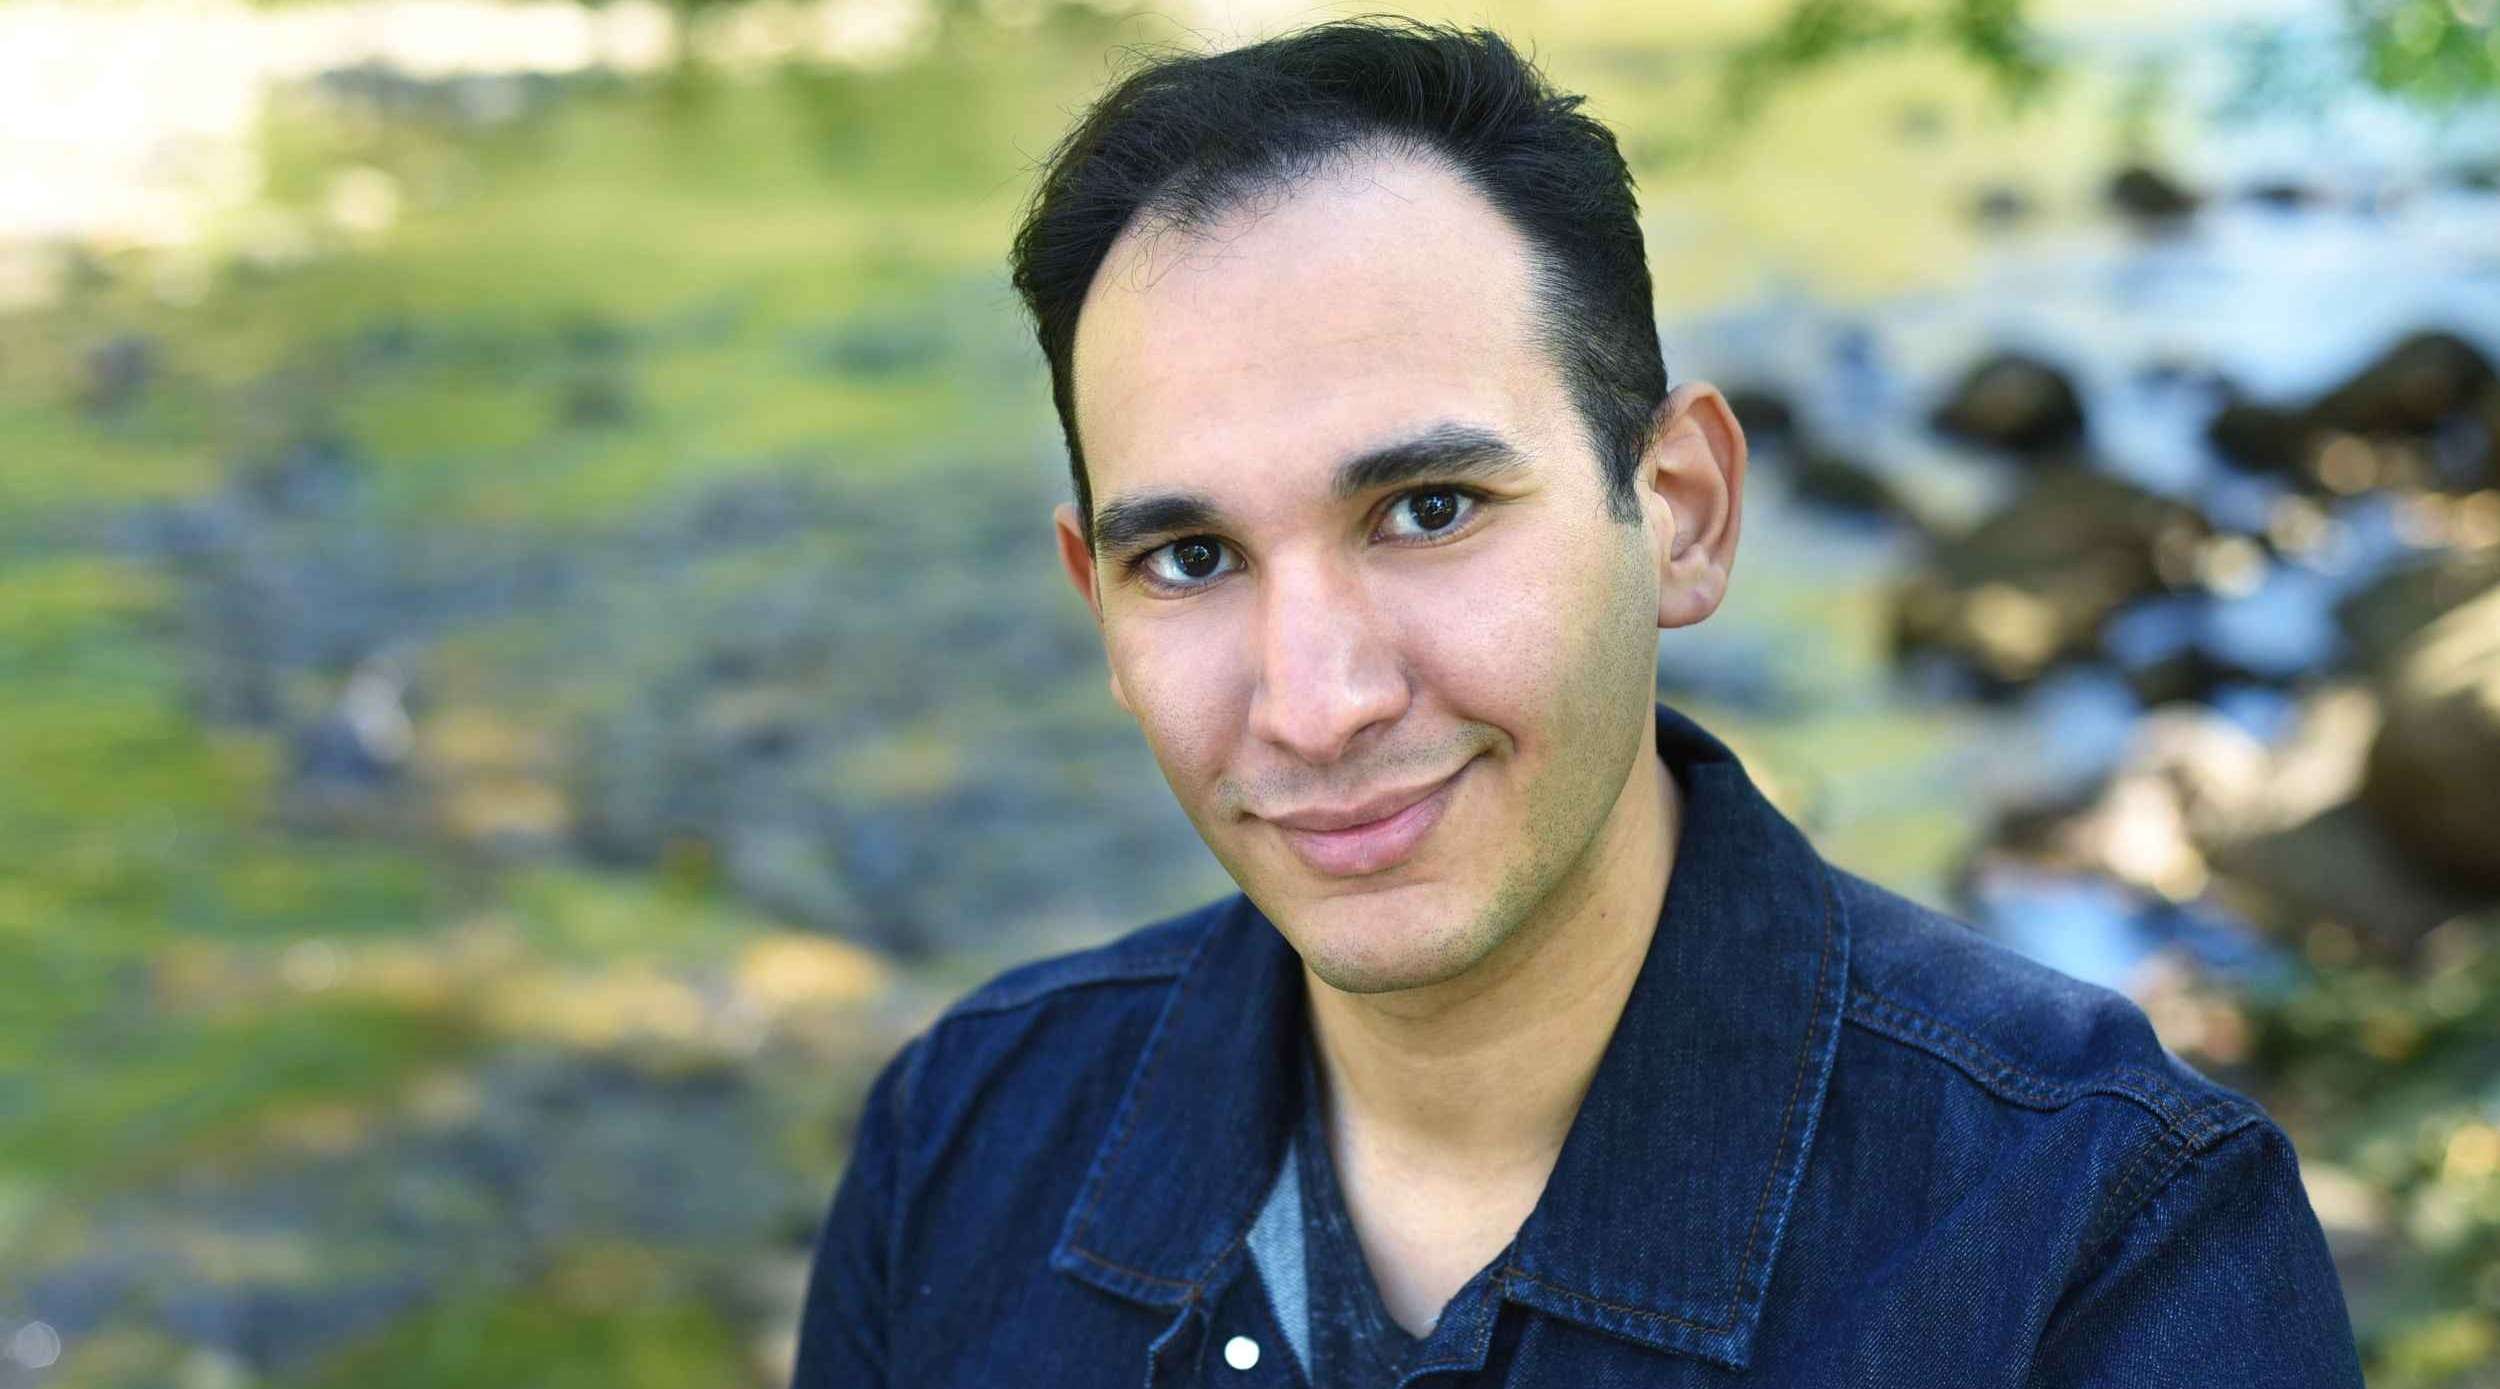 We are excited to welcome tenor Ian Castro to TACT for General Management!